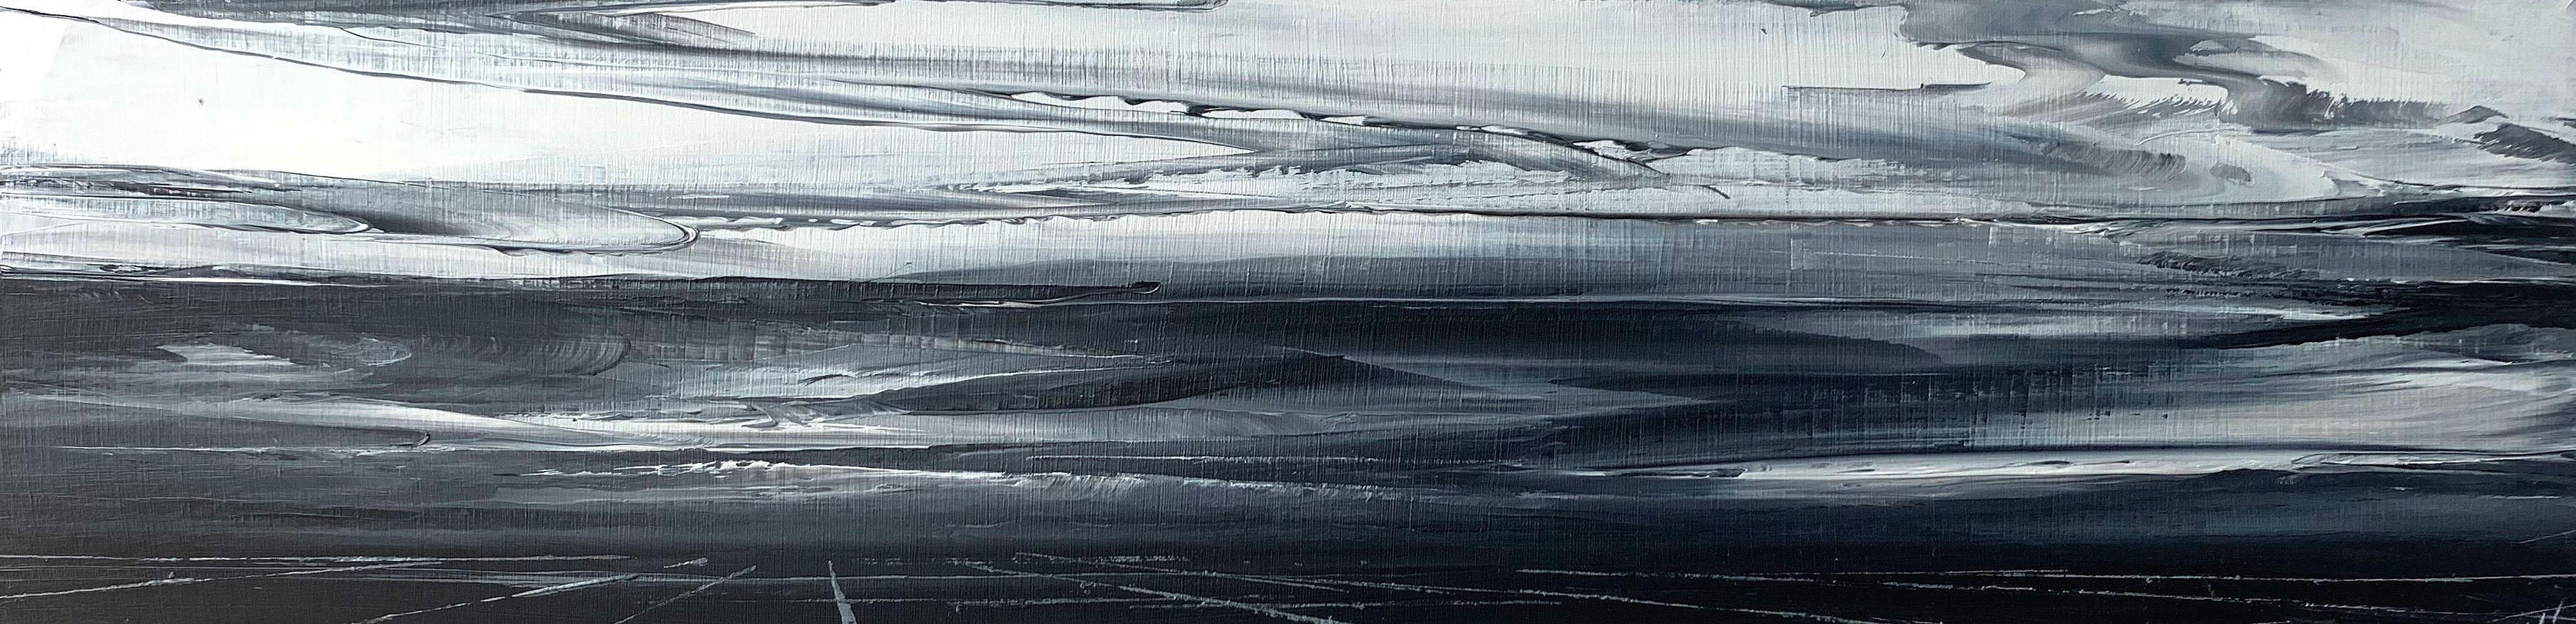 With Sky Peeled Back From The Earth, abstract black and white sky and clouds - Contemporary Art by Todd Carpenter